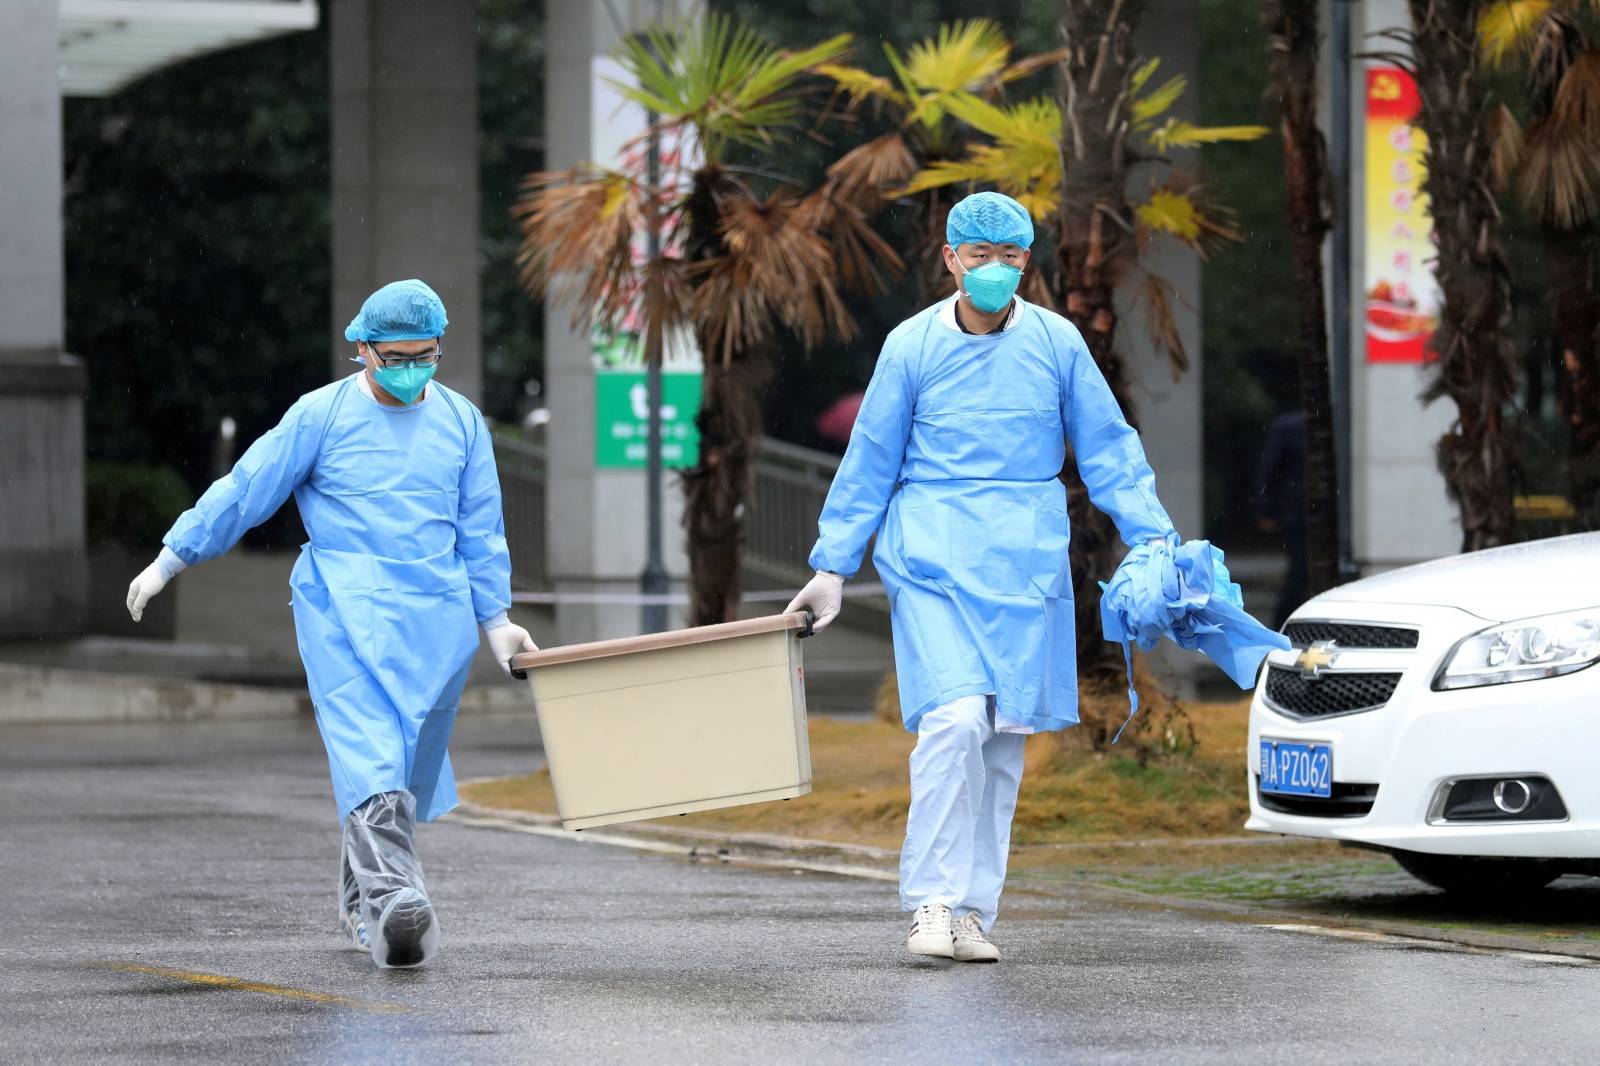 FILE PHOTO - Medical staff carry a box as they walk at the Jinyintan hospital, where the patients with pneumonia caused by the new strain of coronavirus are being treated, in Wuhan